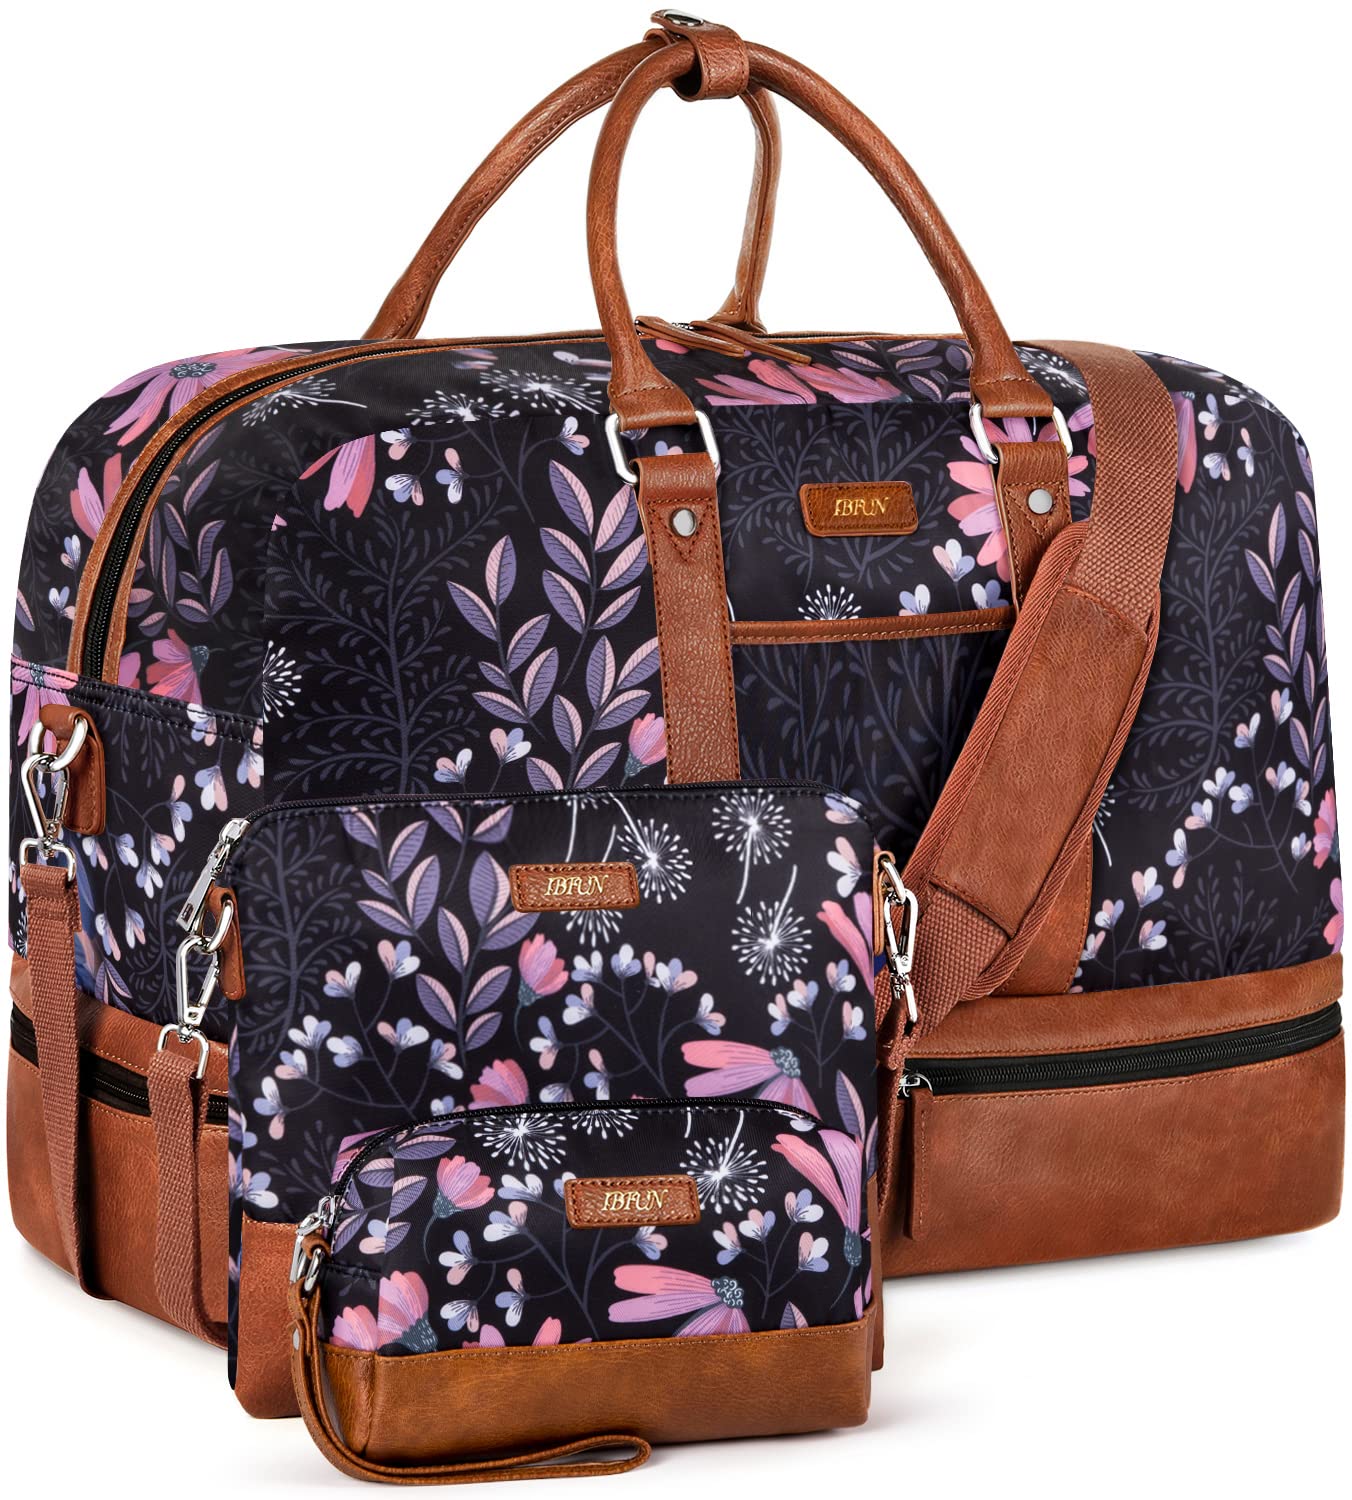 Save 30% on 3pcs Set Travel Weekender Bags with Shoe Compartment